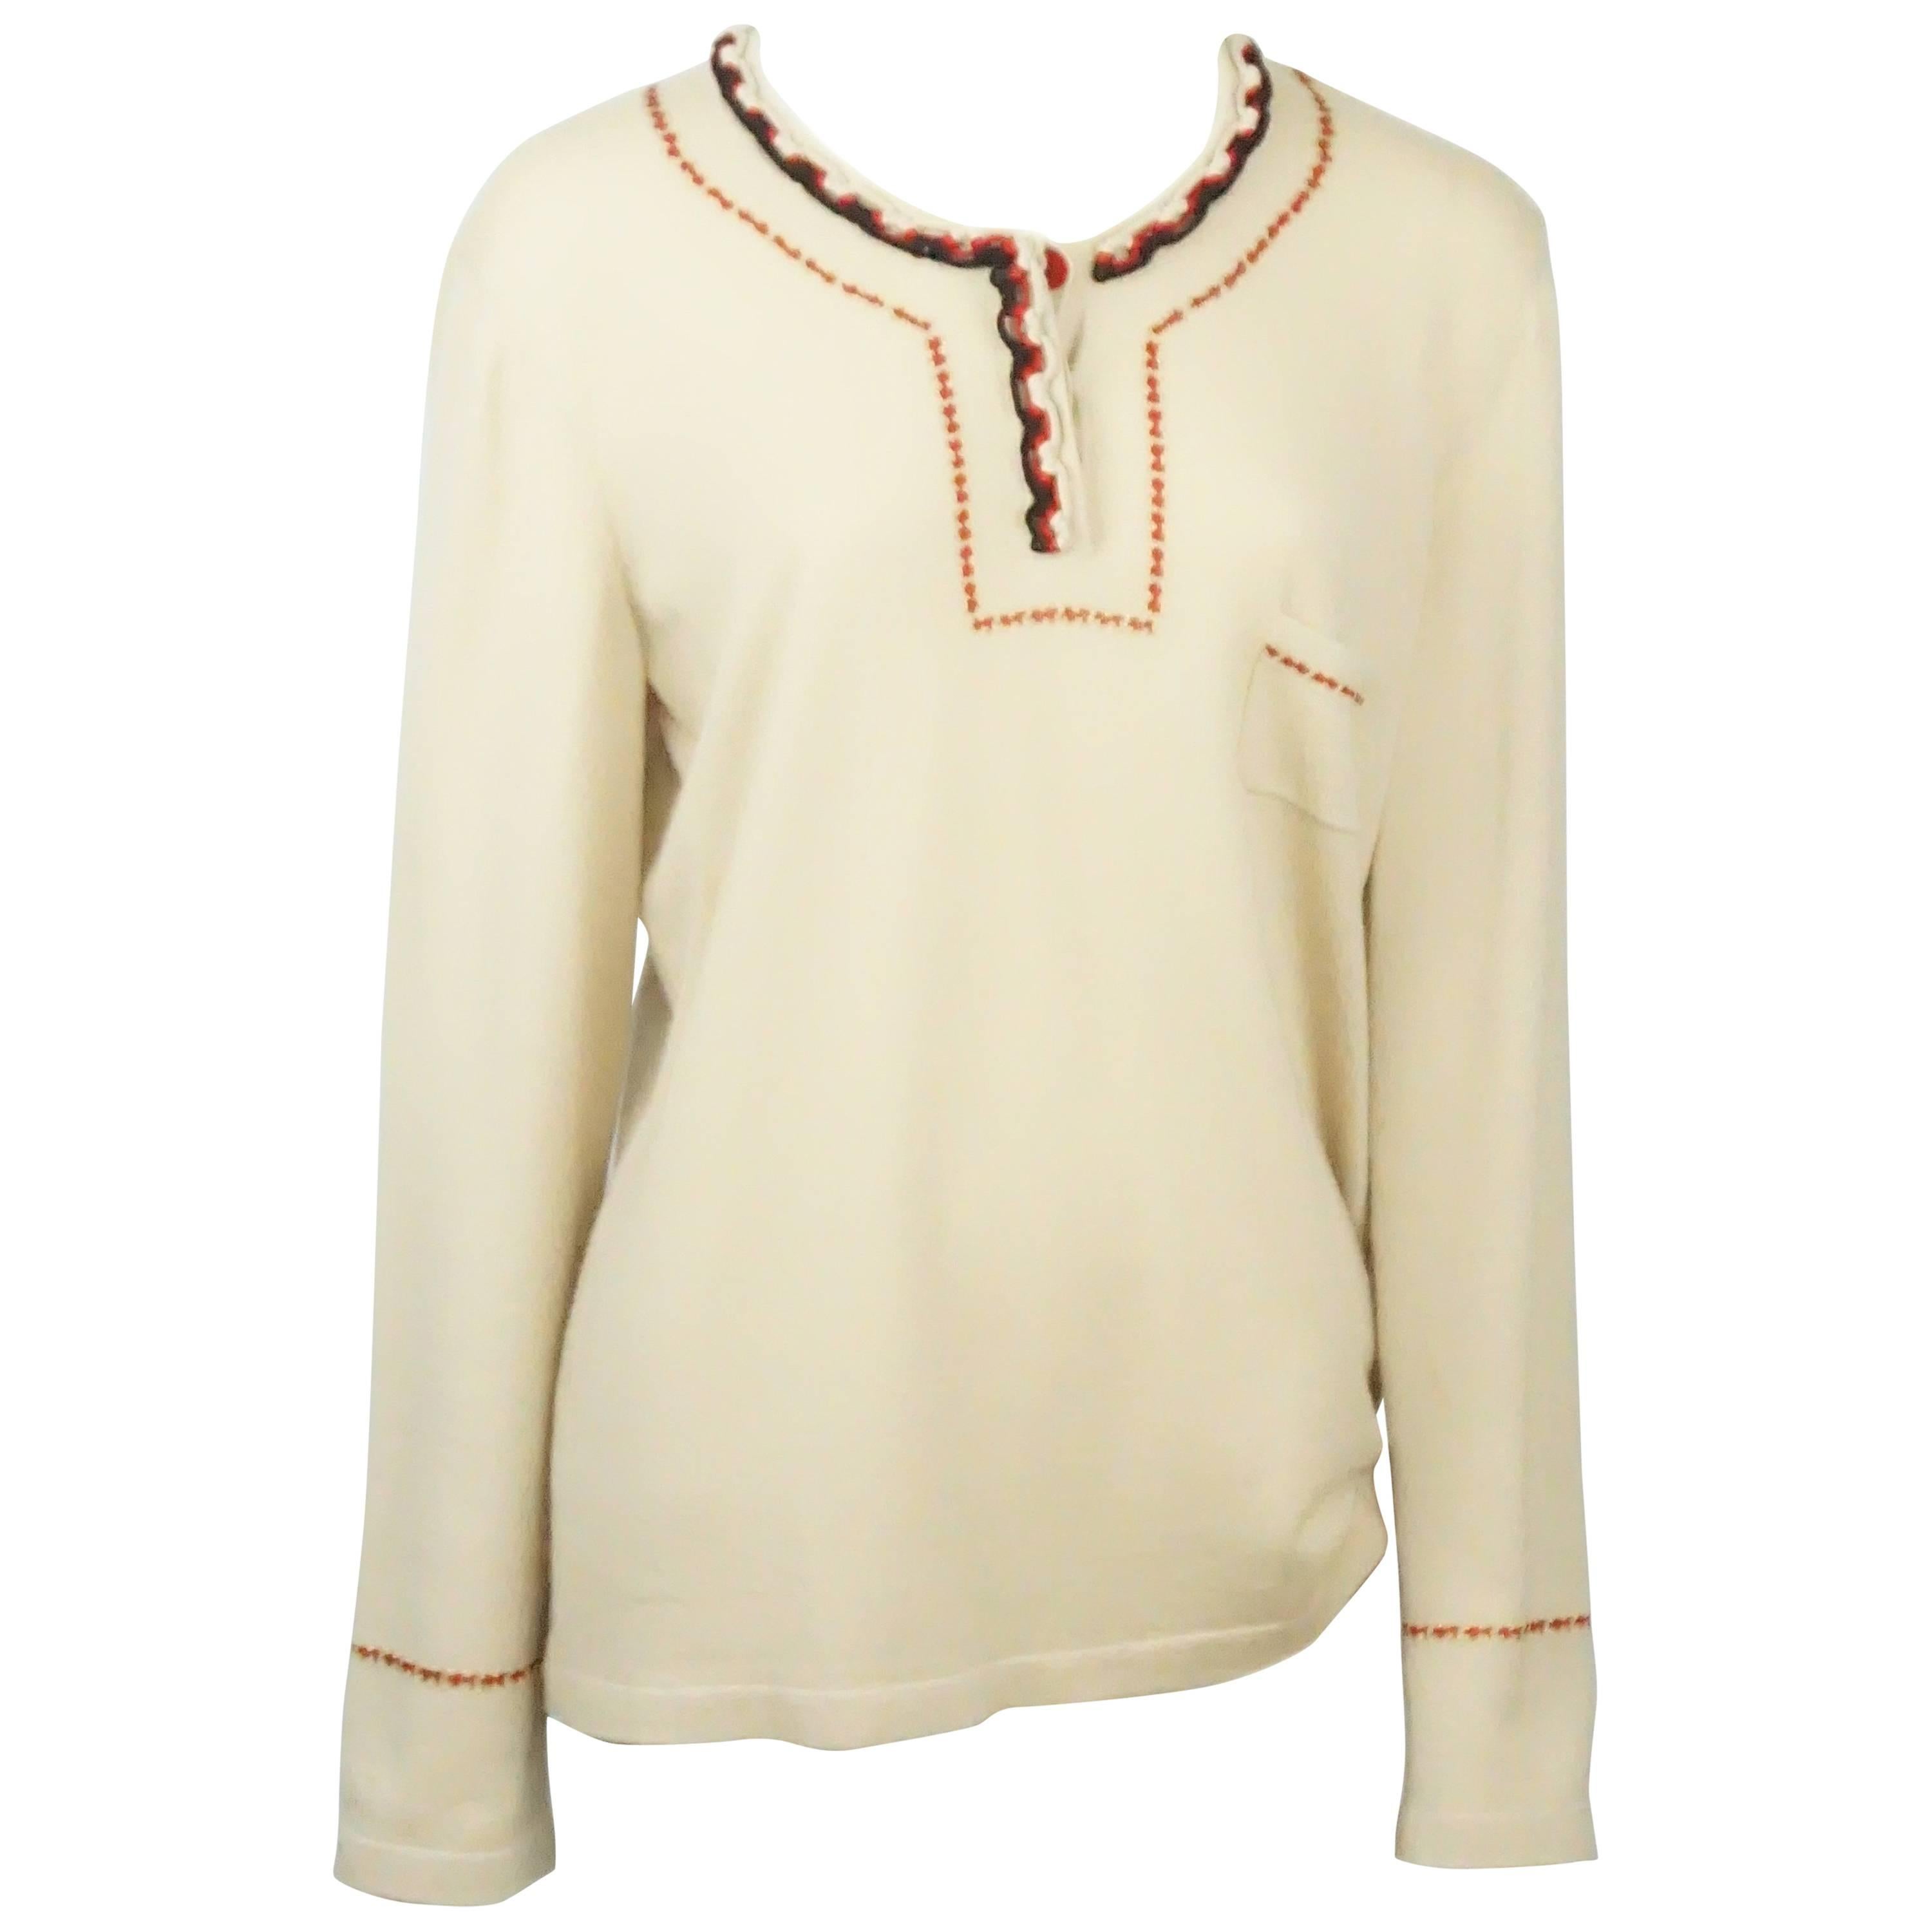 Chanel Tan Cashmere Sweater with Red and Black Cord Trim - 48 - 06A